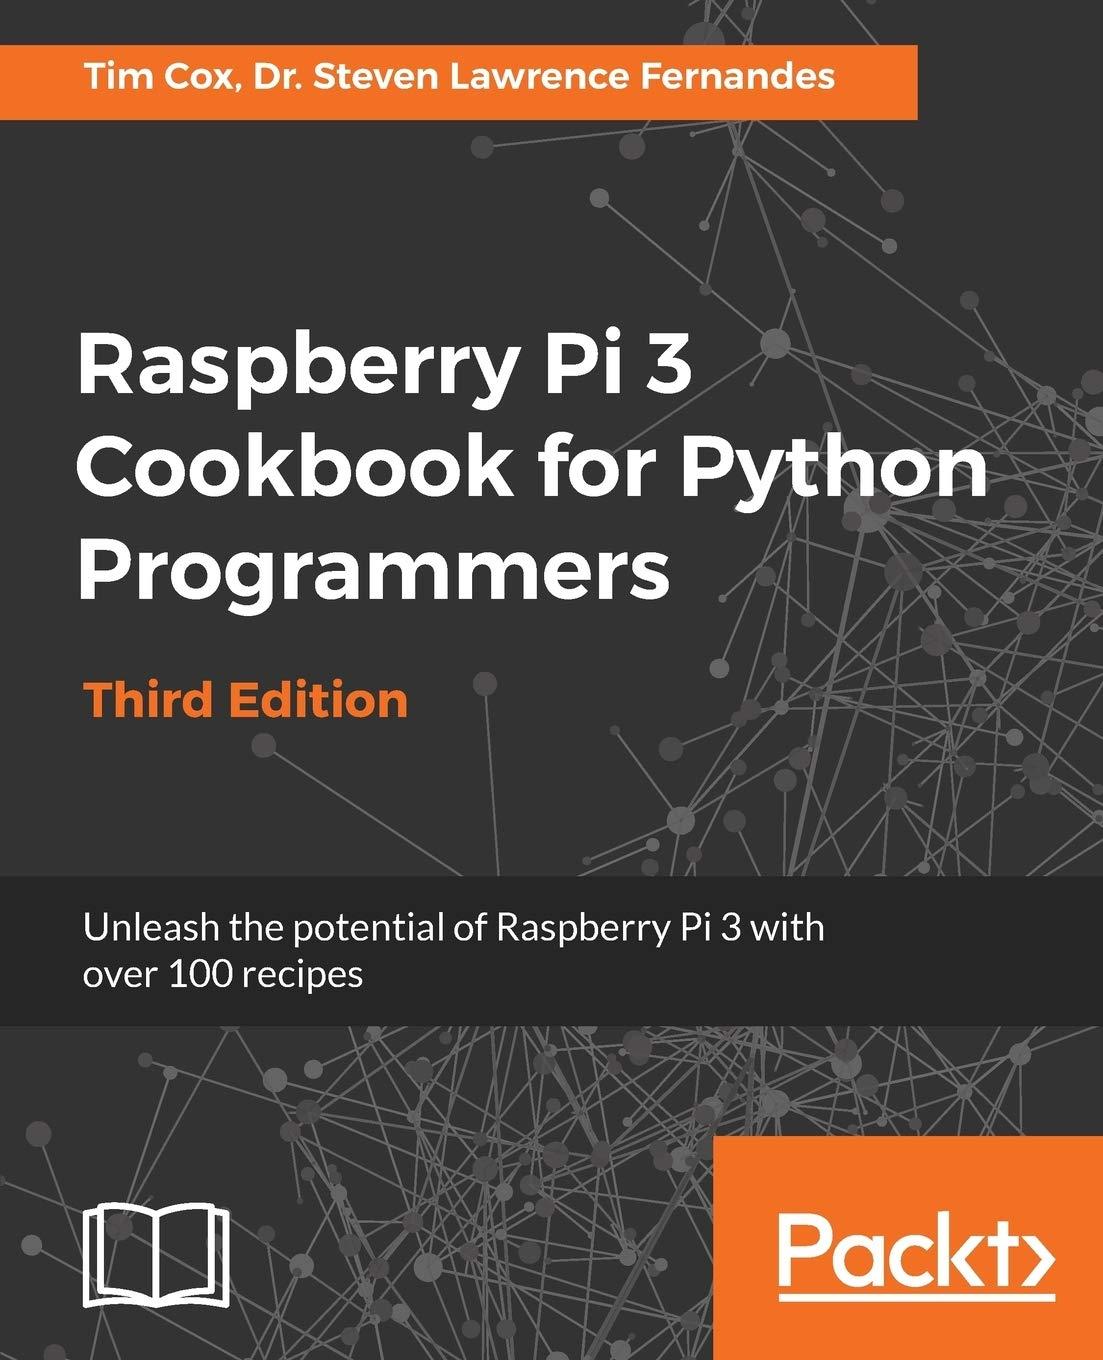 raspberry pi 3 cookbook for python programmers unleash the potential of raspberry pi 3 with over 100 recipes